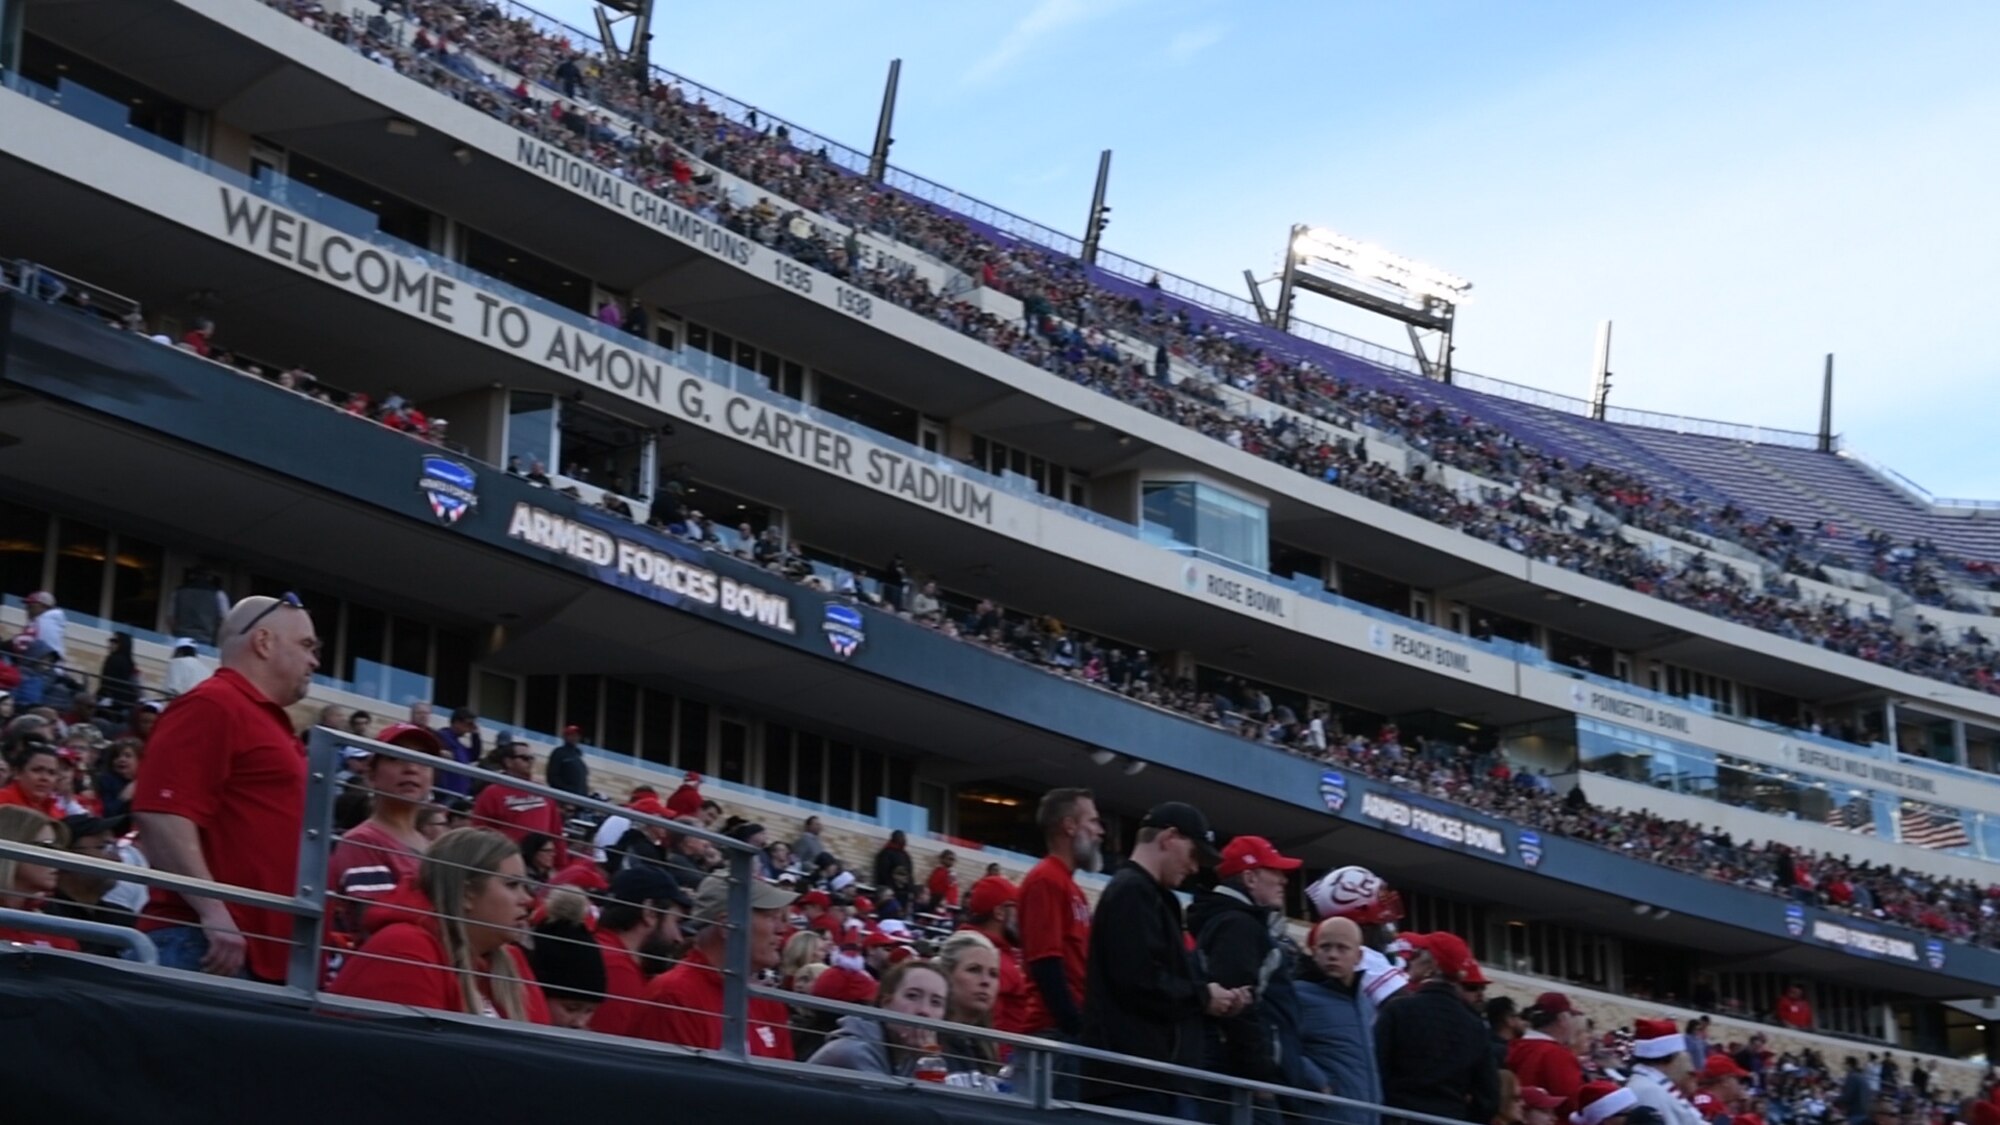 Football fans watch the Armed Forces Bowl, Dec. 22, 2018, at Fort Worth, Texas. The Armed Forces Bowl attracts approximately 700,000 attendees each year for the event that honors the U.S. military. (U.S. Air Force photo by Amn Dallin Wrye)